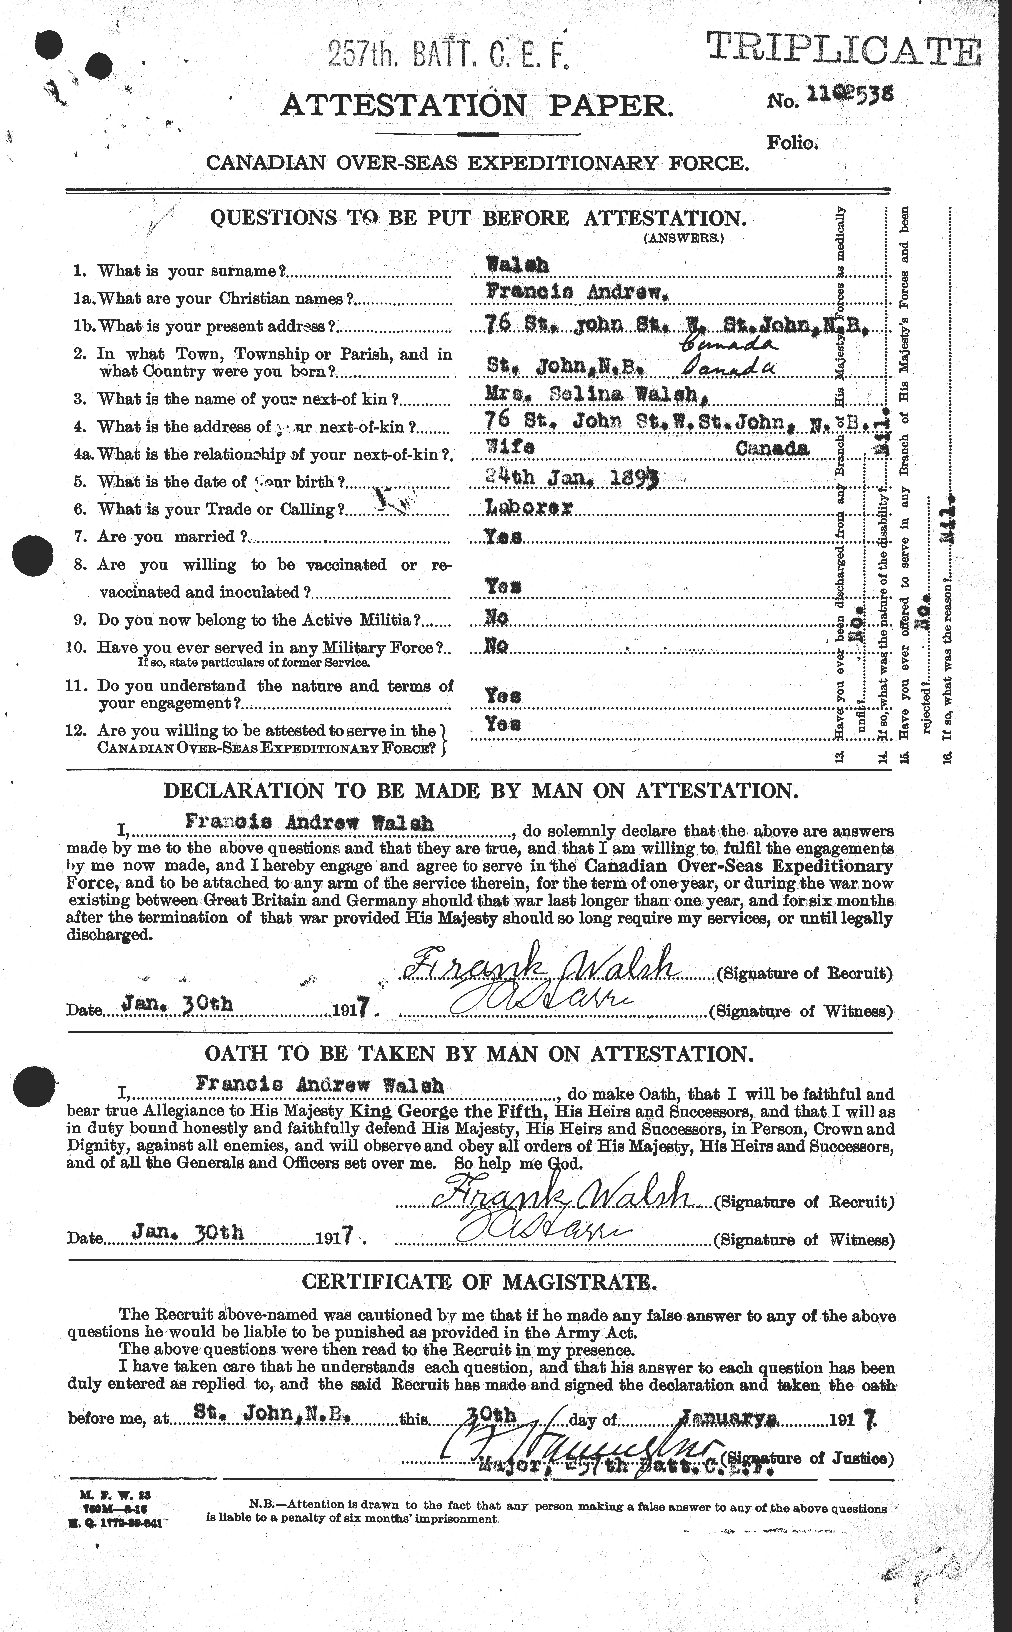 Personnel Records of the First World War - CEF 652750a